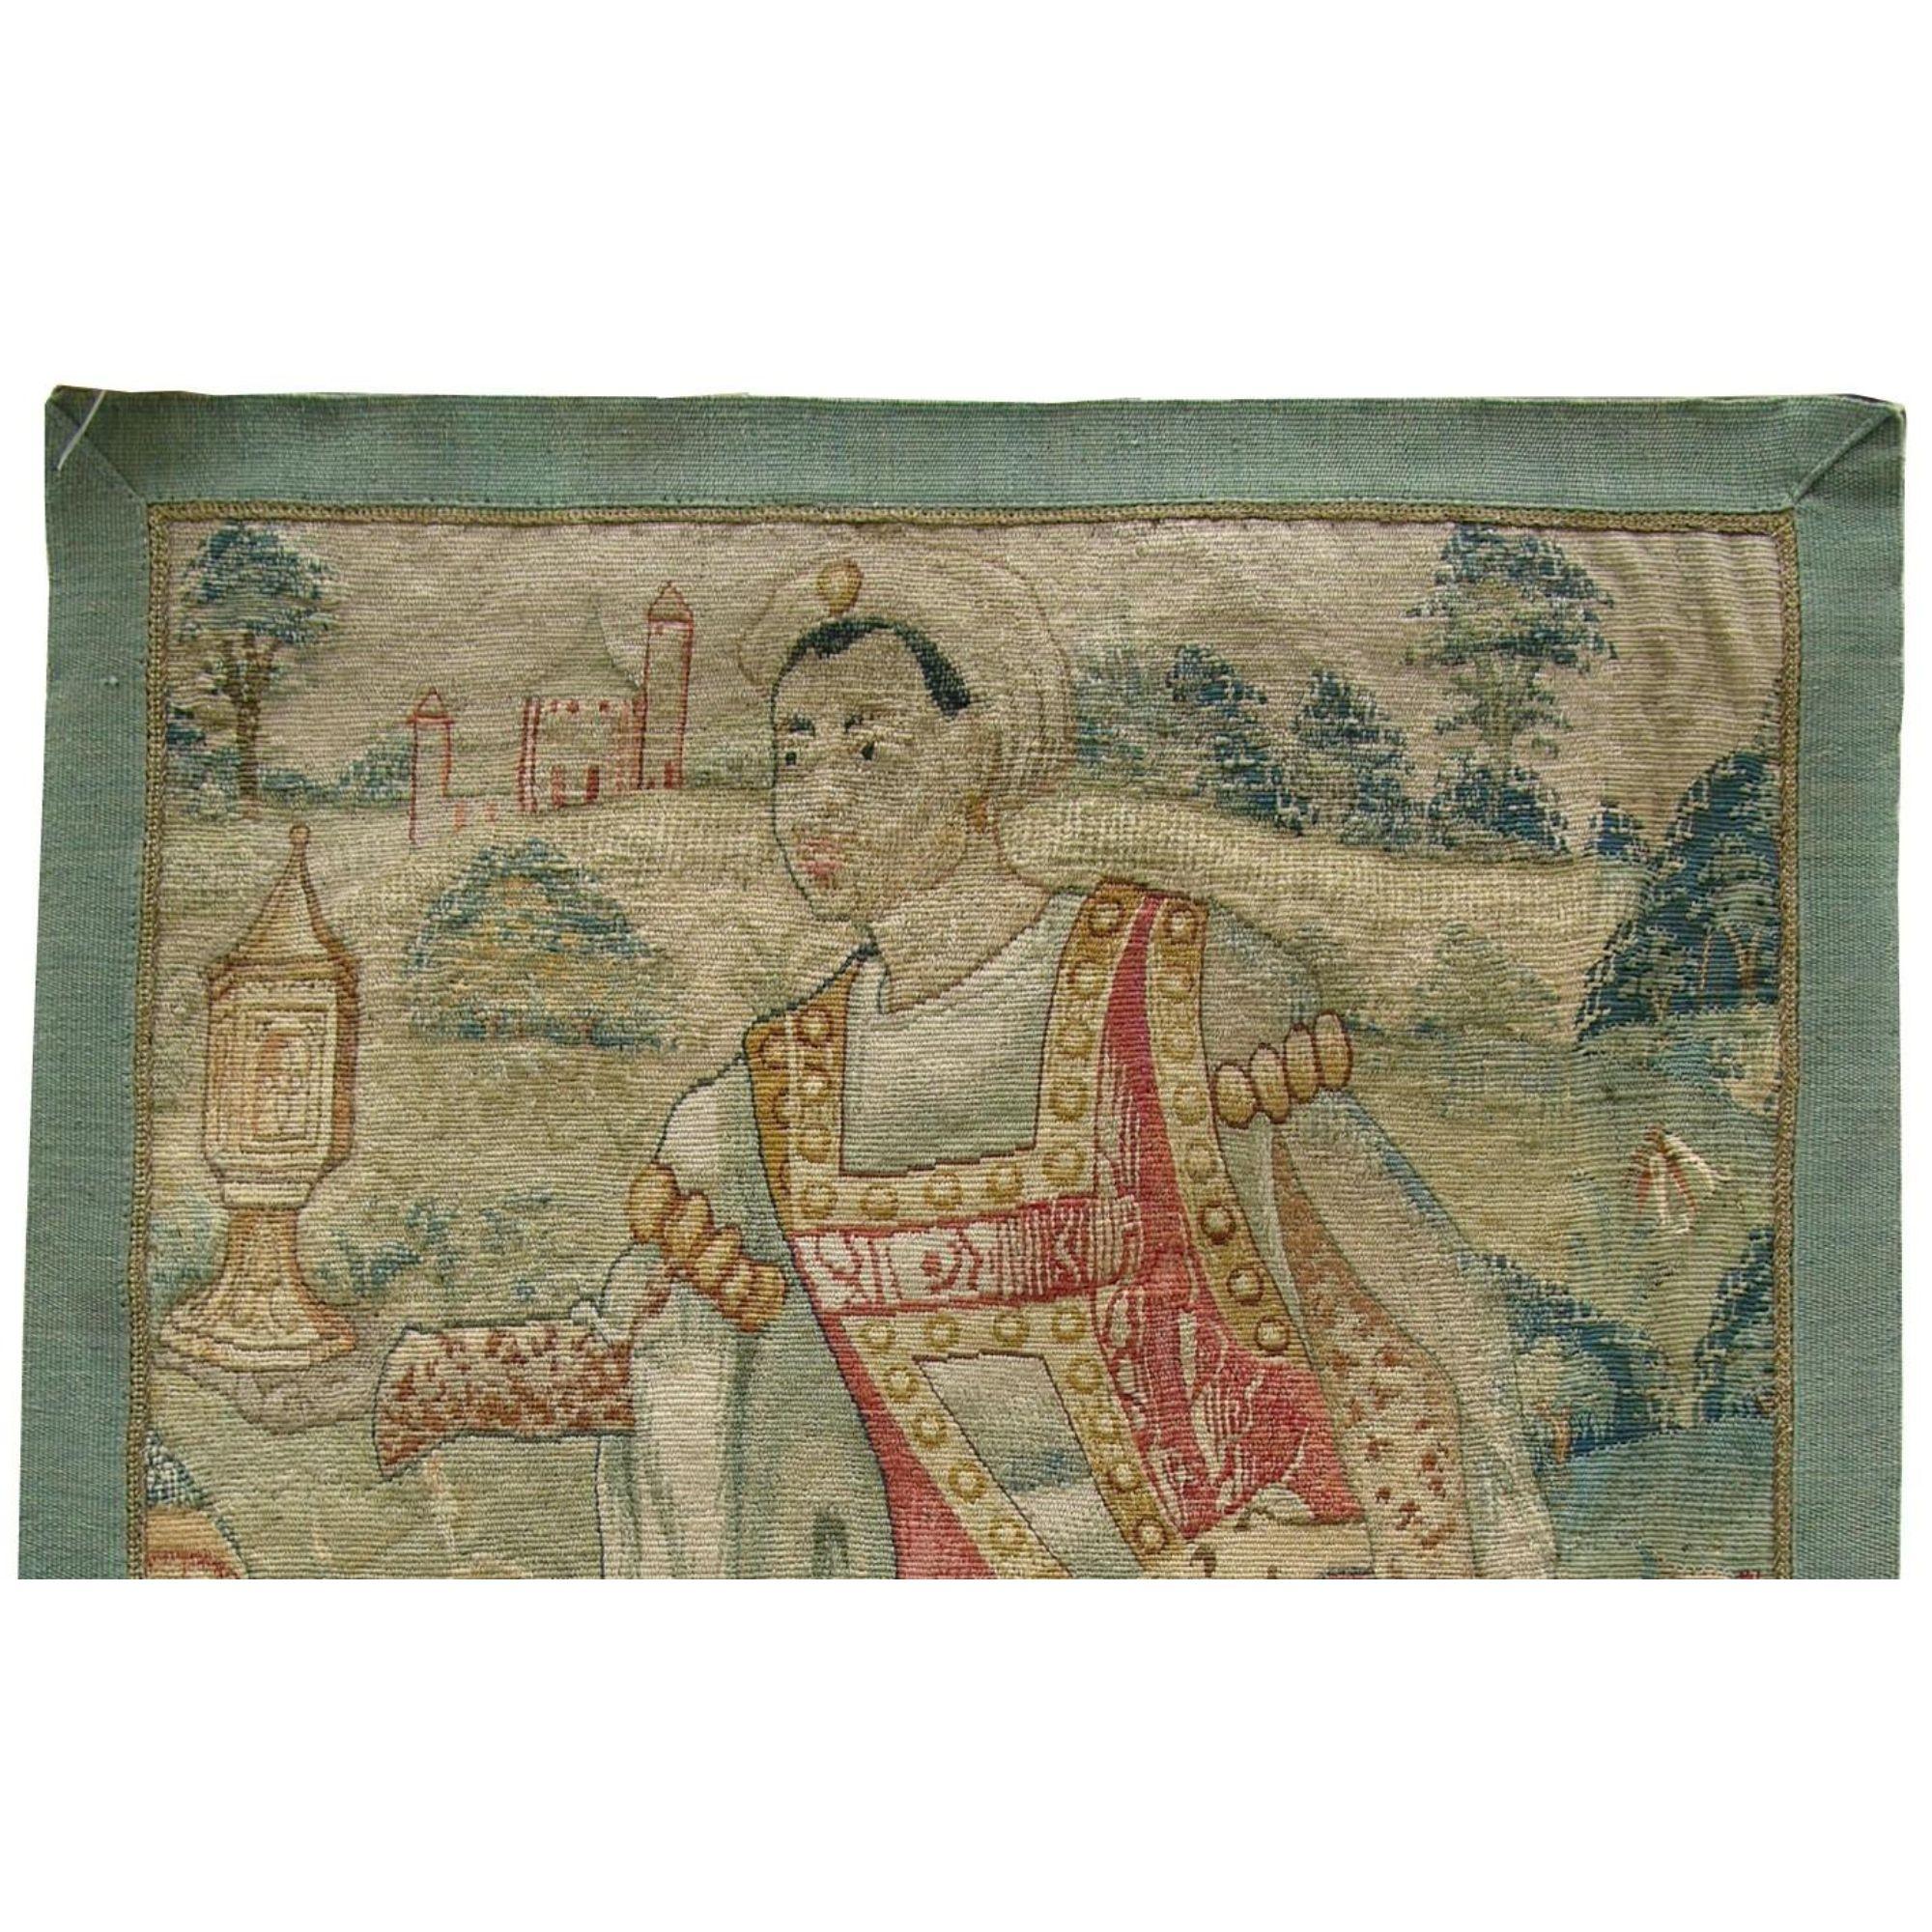 Unknown 17th Century Brussels Tapestry 2'8